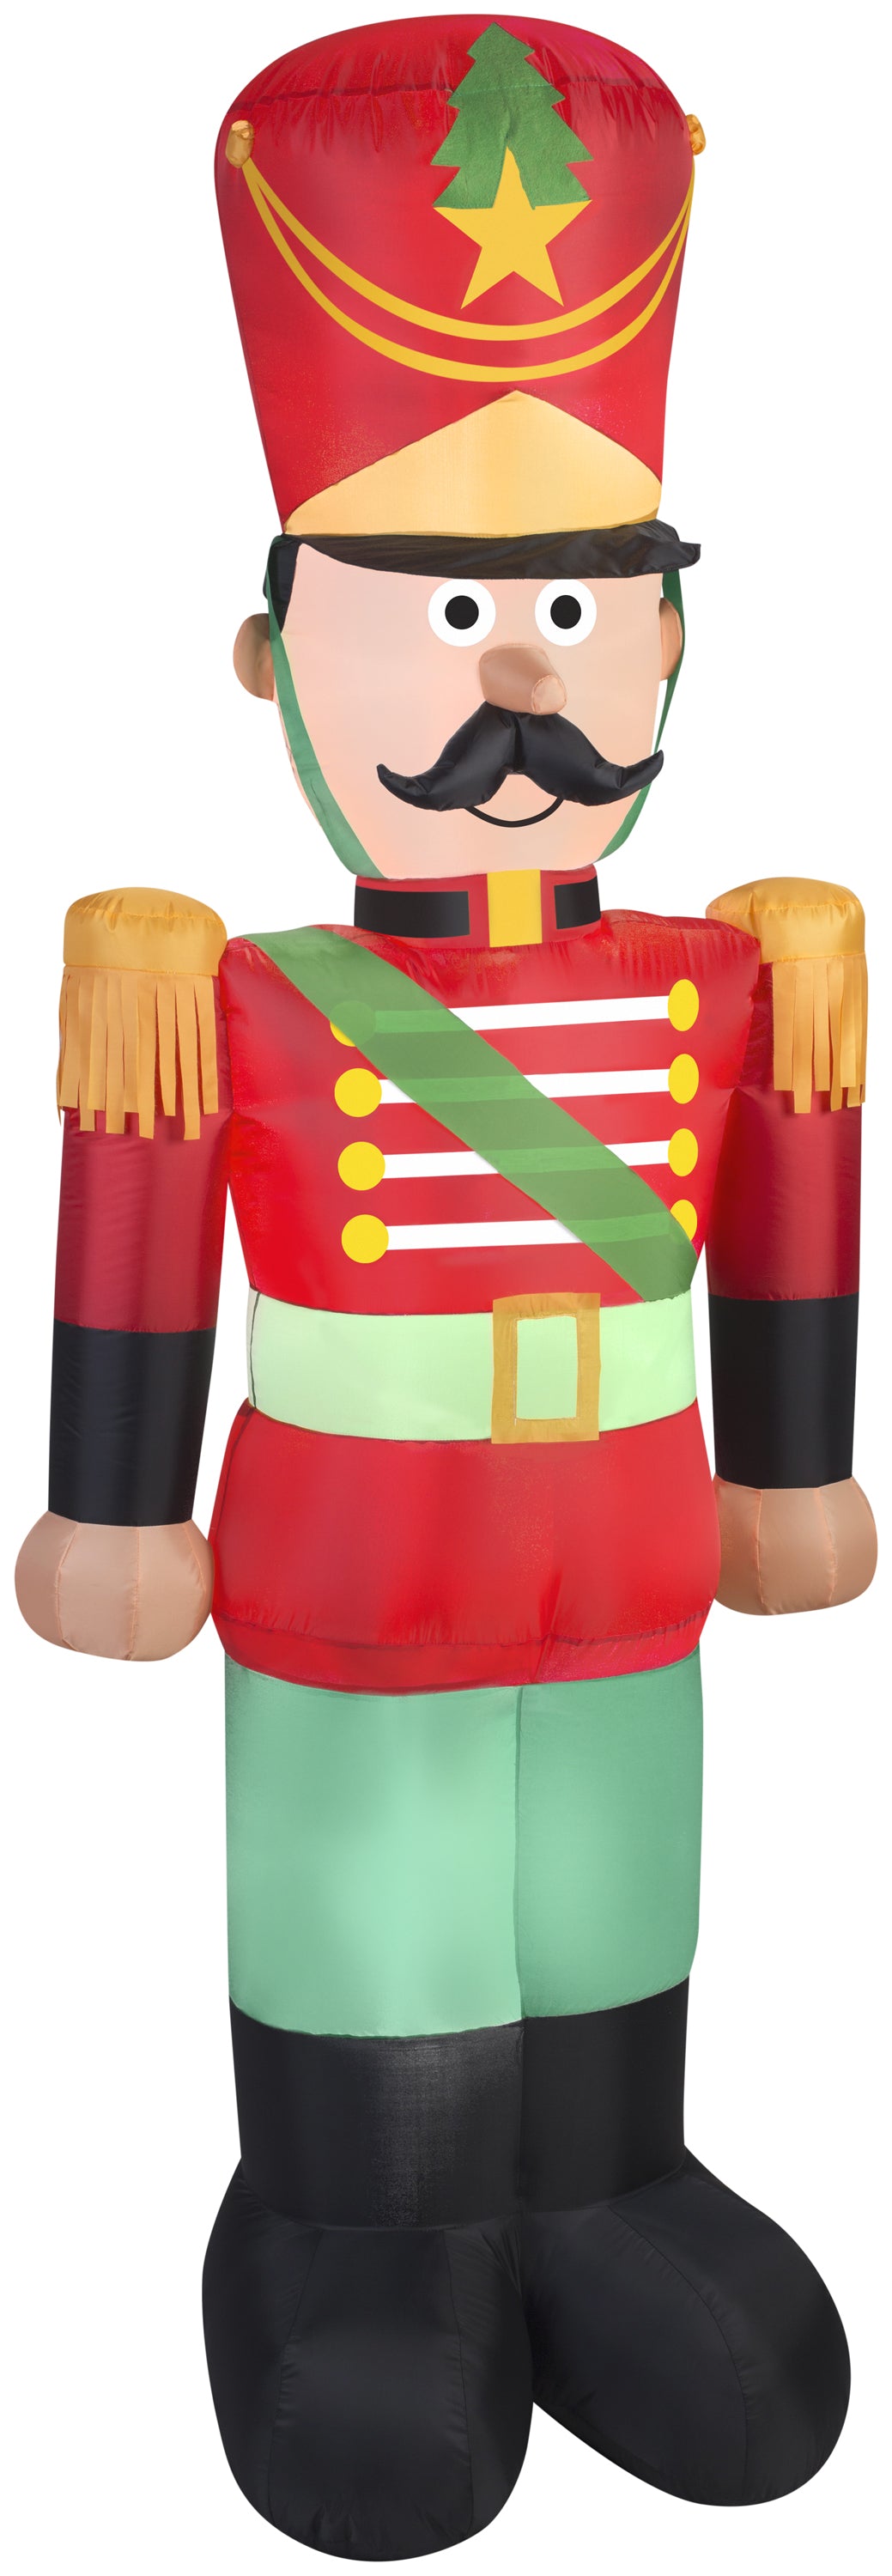 7' Airblown Toy Soldier w/ Mustache Christmas Inflatable